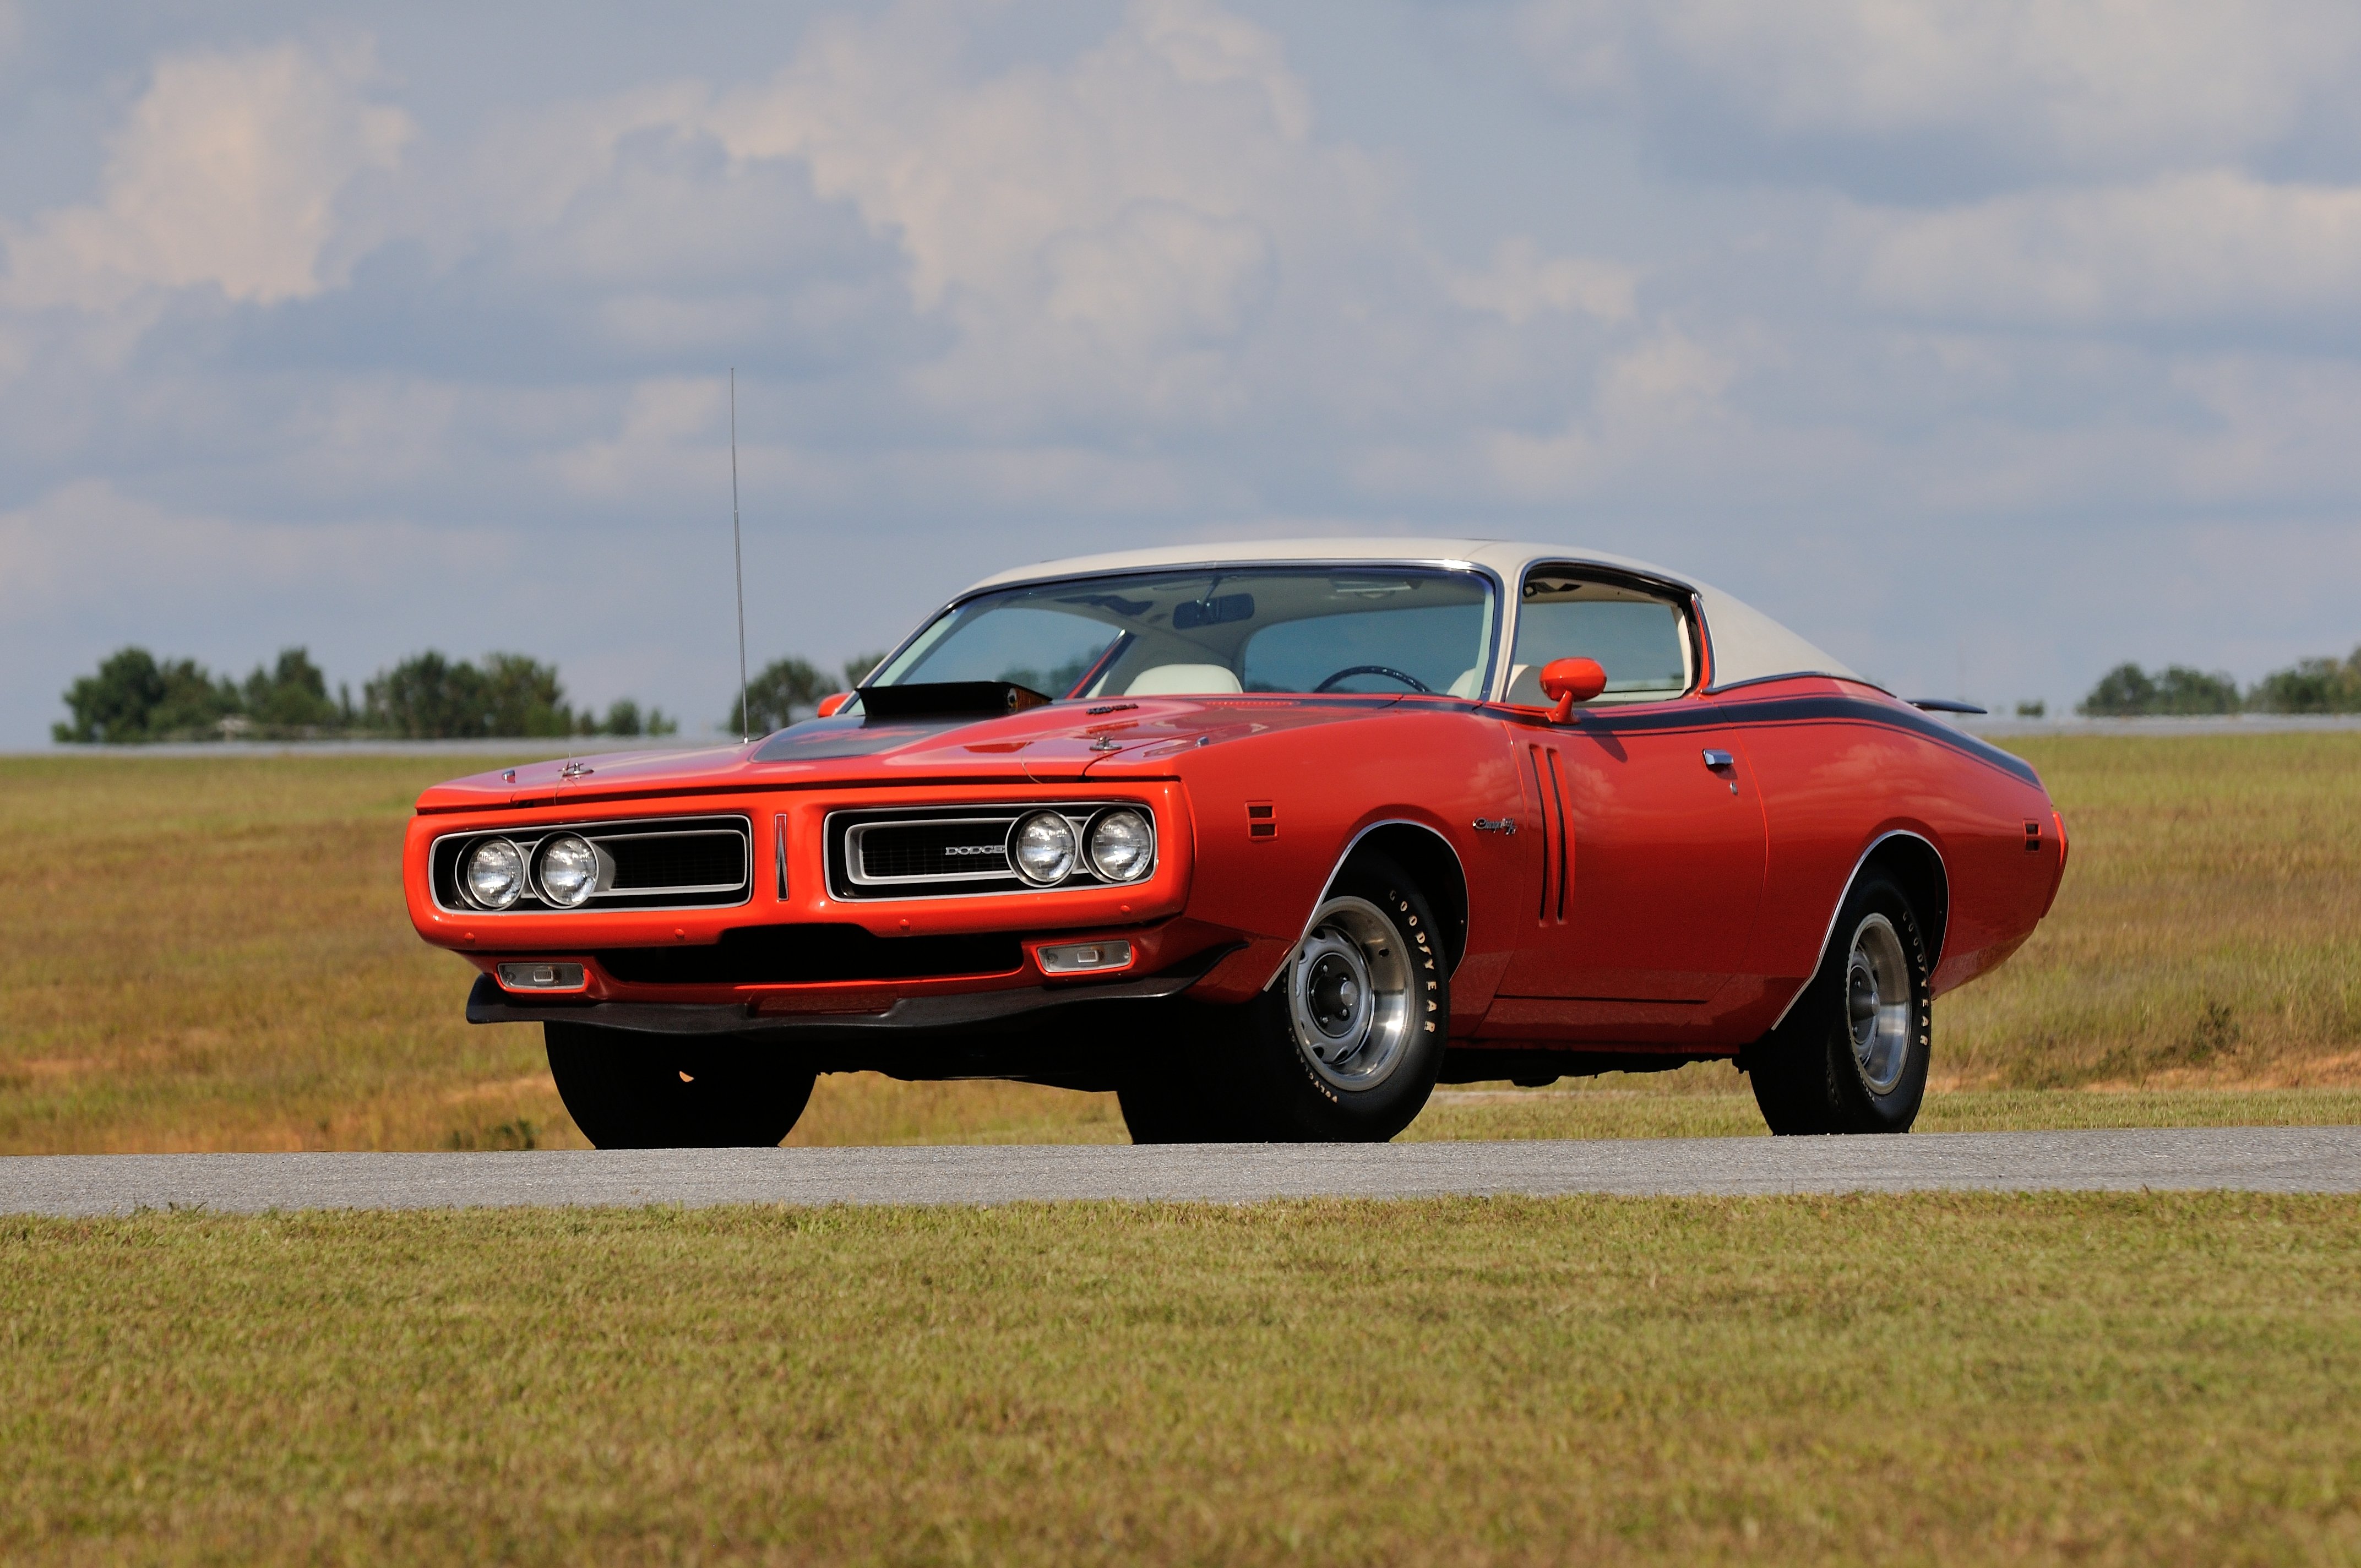 1971, Dodge, Hemi, Charger, Rt, Sunroof, Red, Muscle, Classic, Old, Usa, 4288x2848 01 Wallpaper